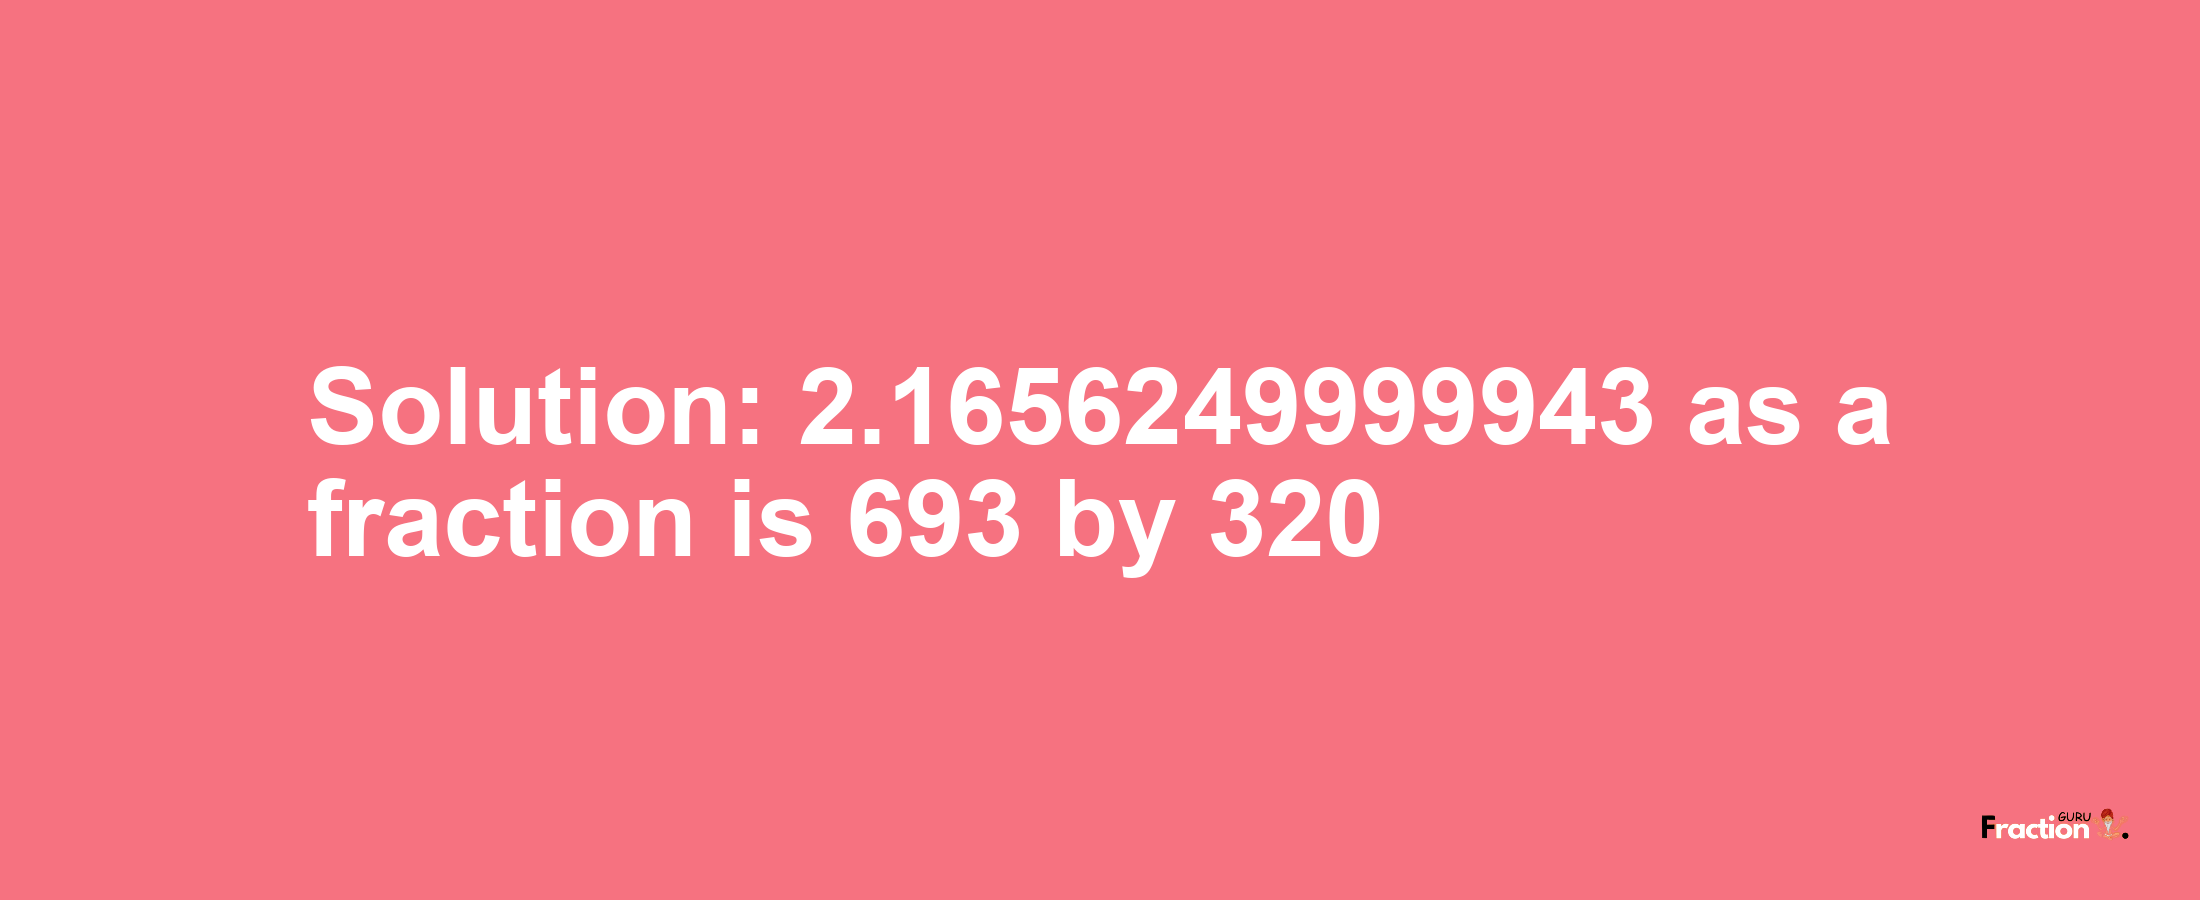 Solution:2.1656249999943 as a fraction is 693/320